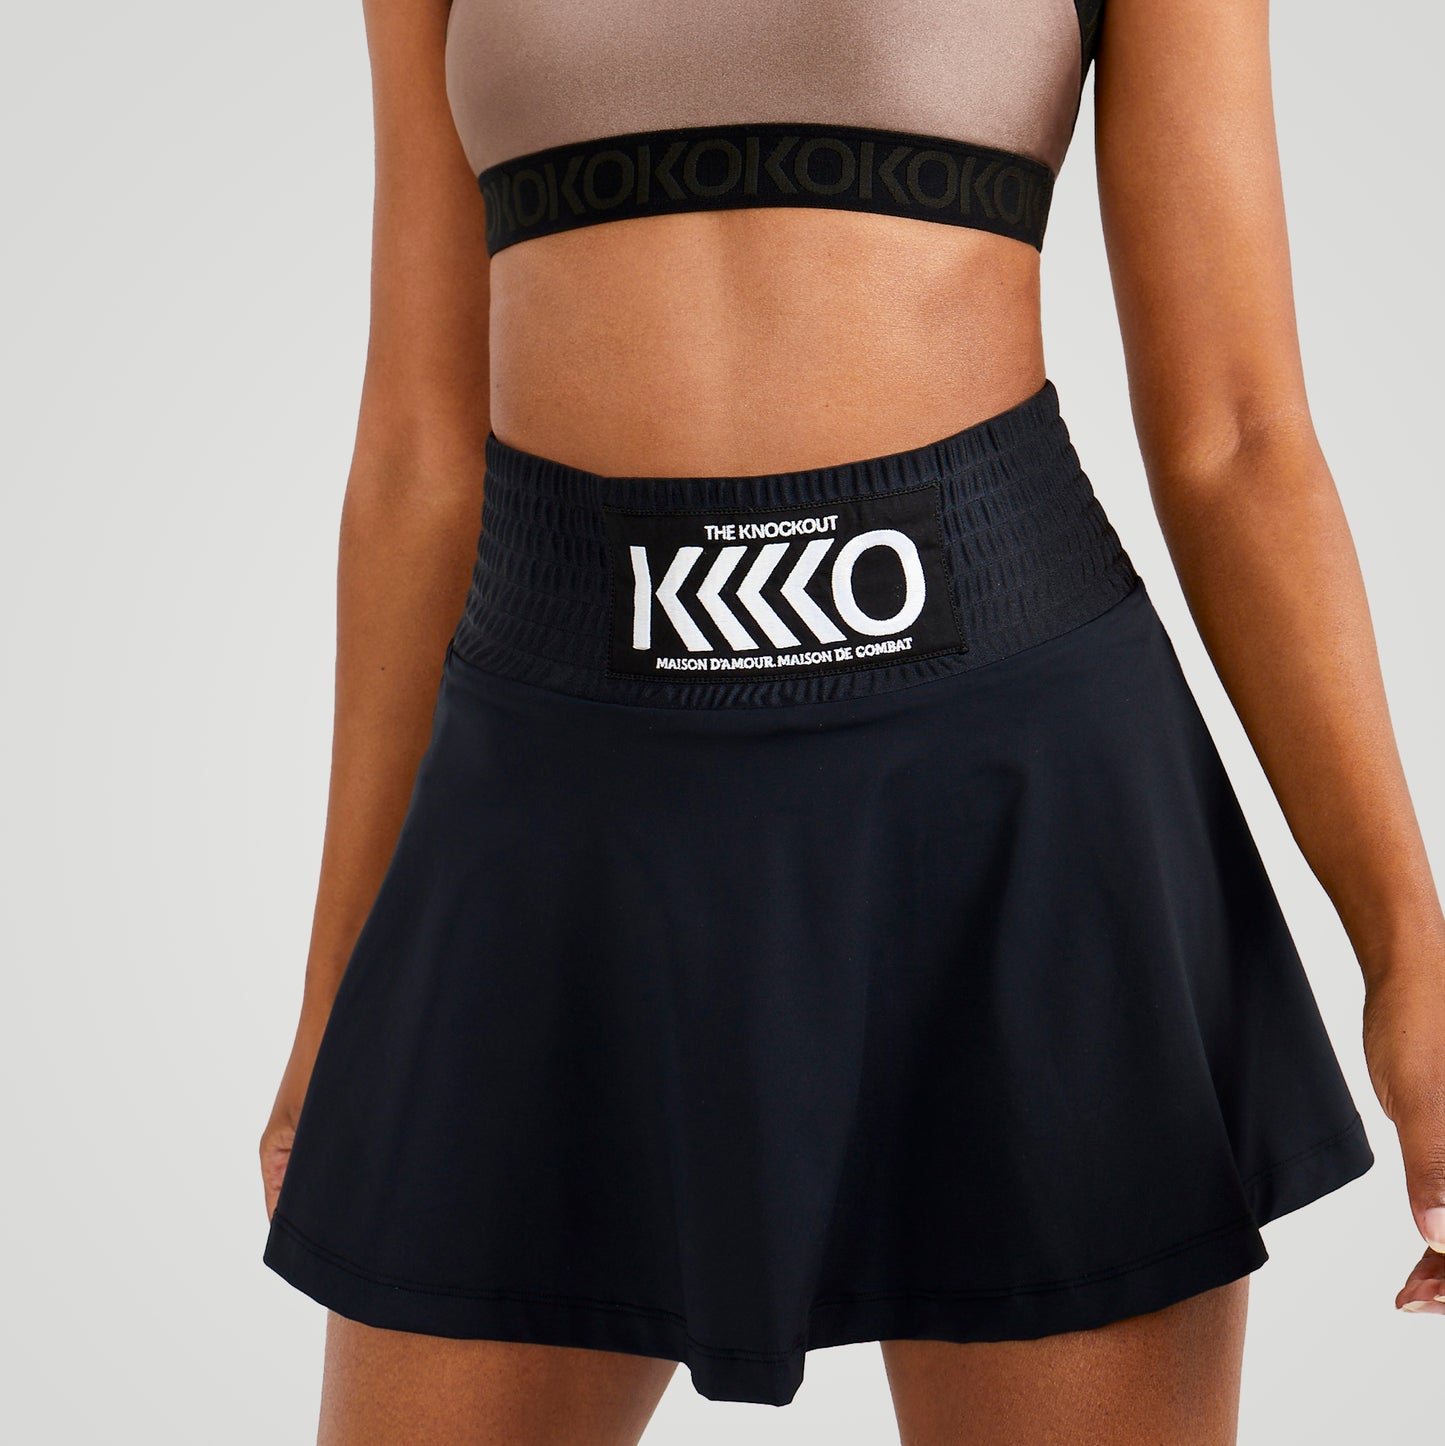 THE KNOCKOUT Fighting Skirt